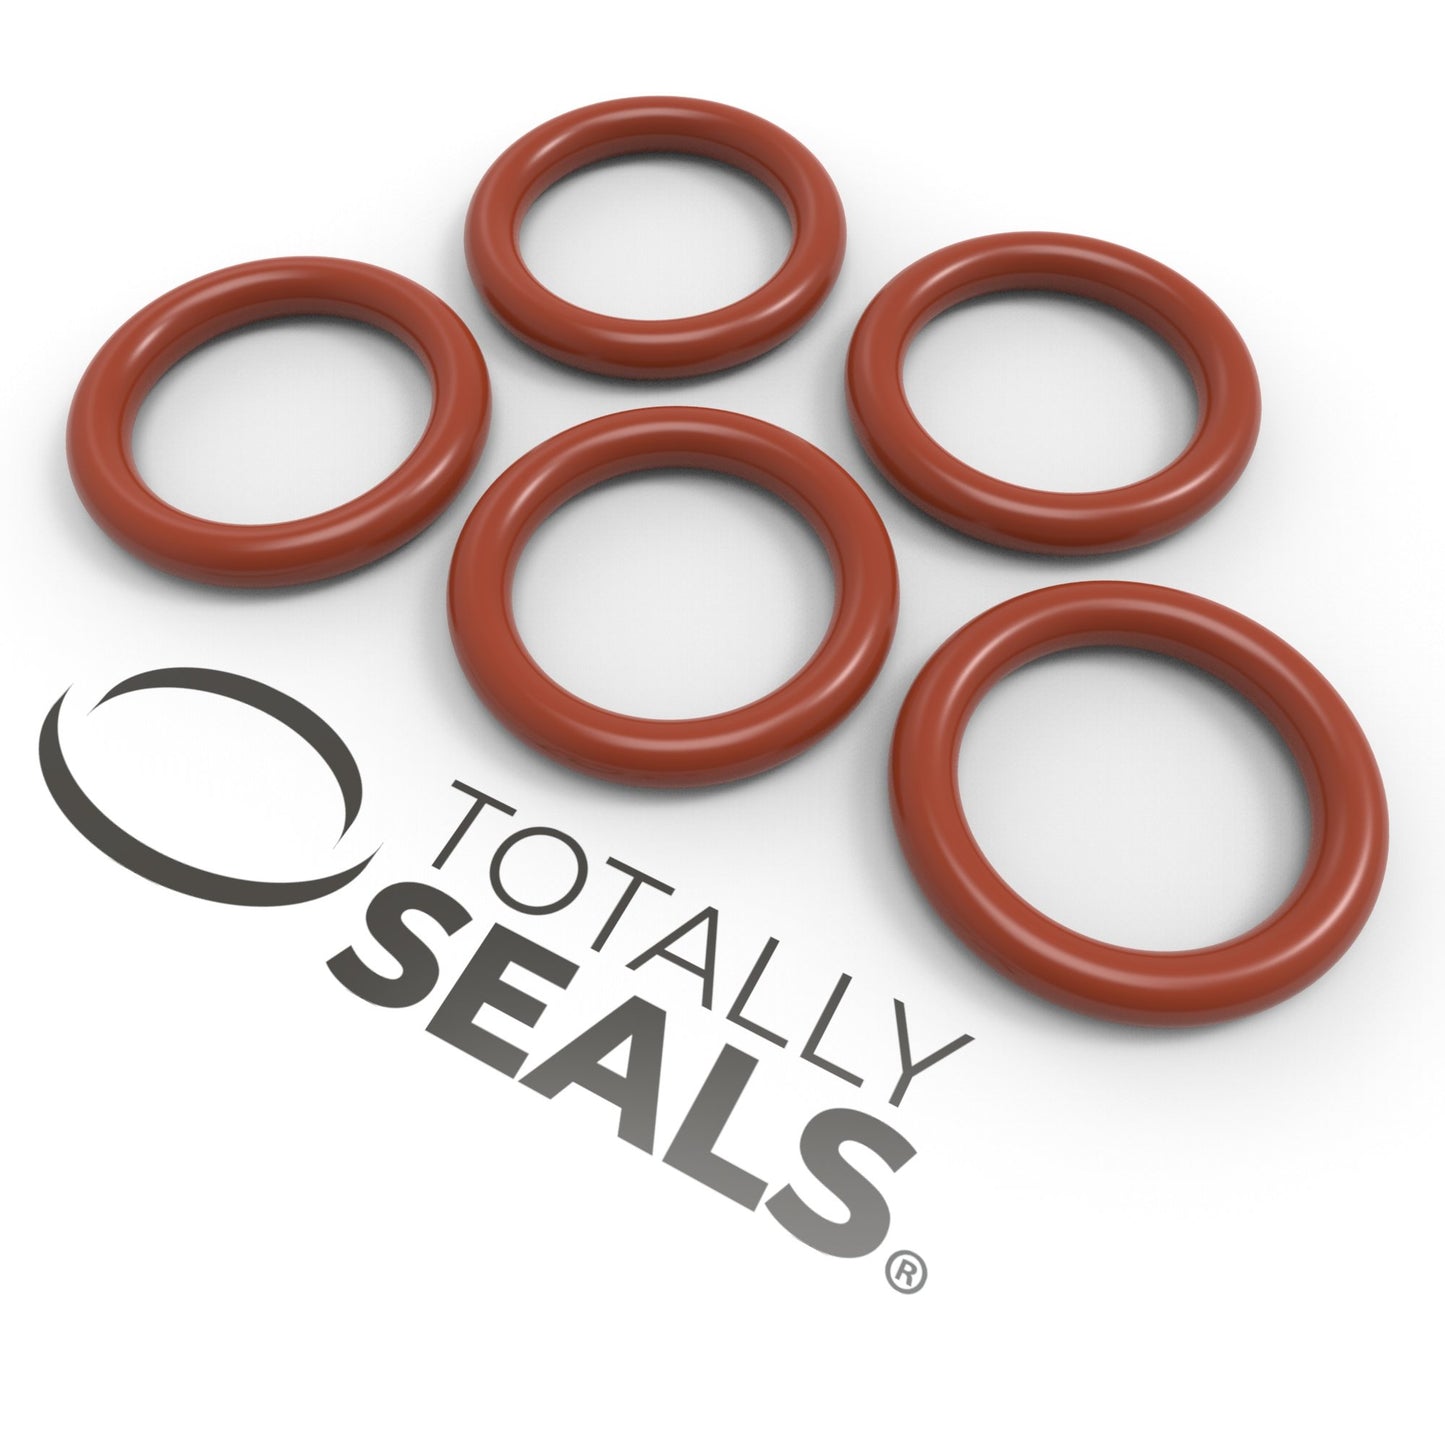 24mm x 3mm (30mm OD) Silicone O-Rings - Totally Seals®